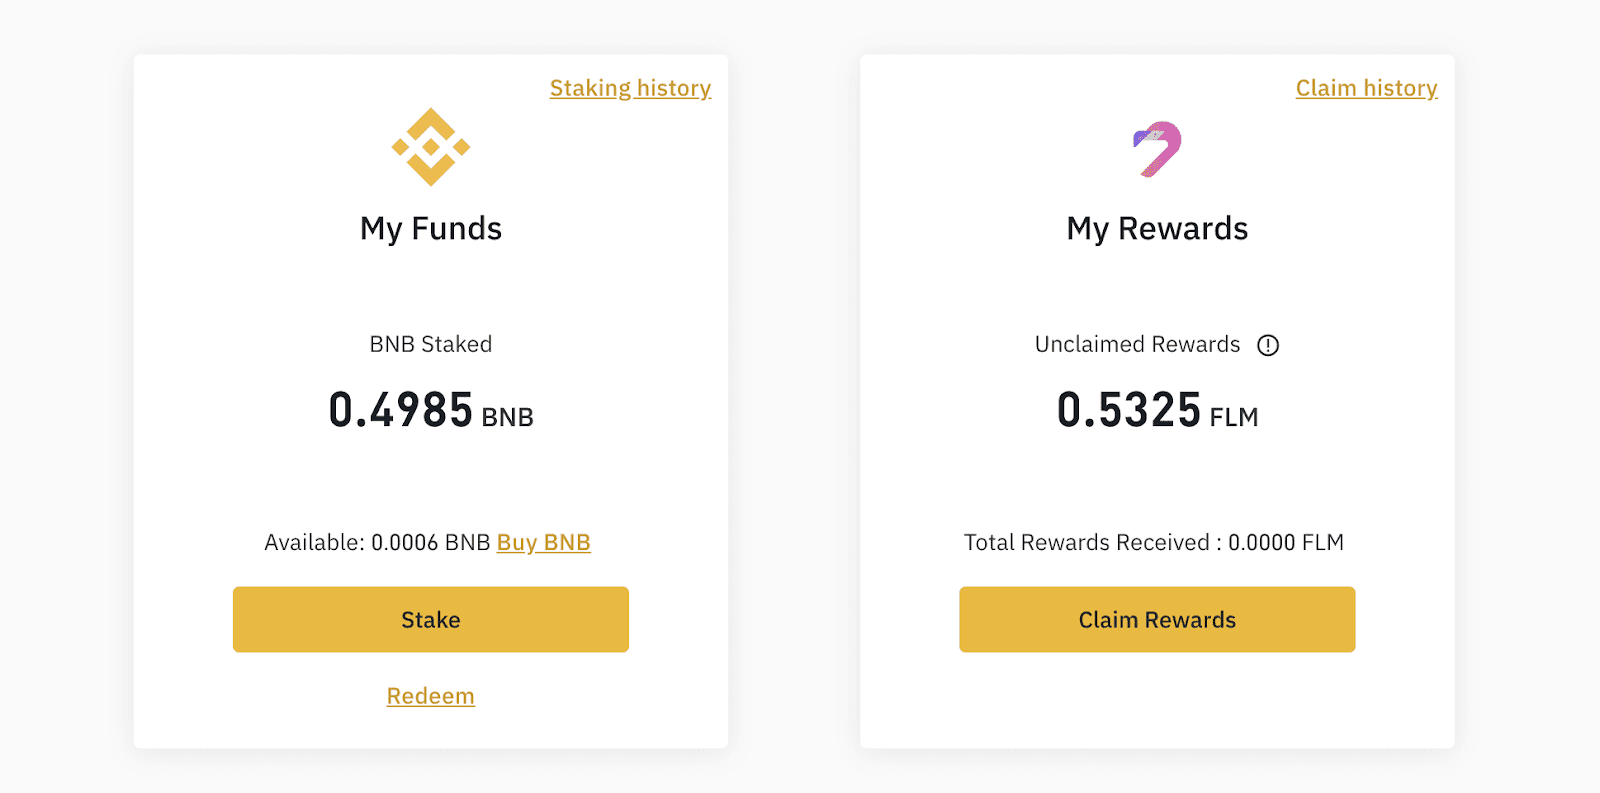 BNB Staking: How to Earn Passive Income with Binance Coin - FasterCapital